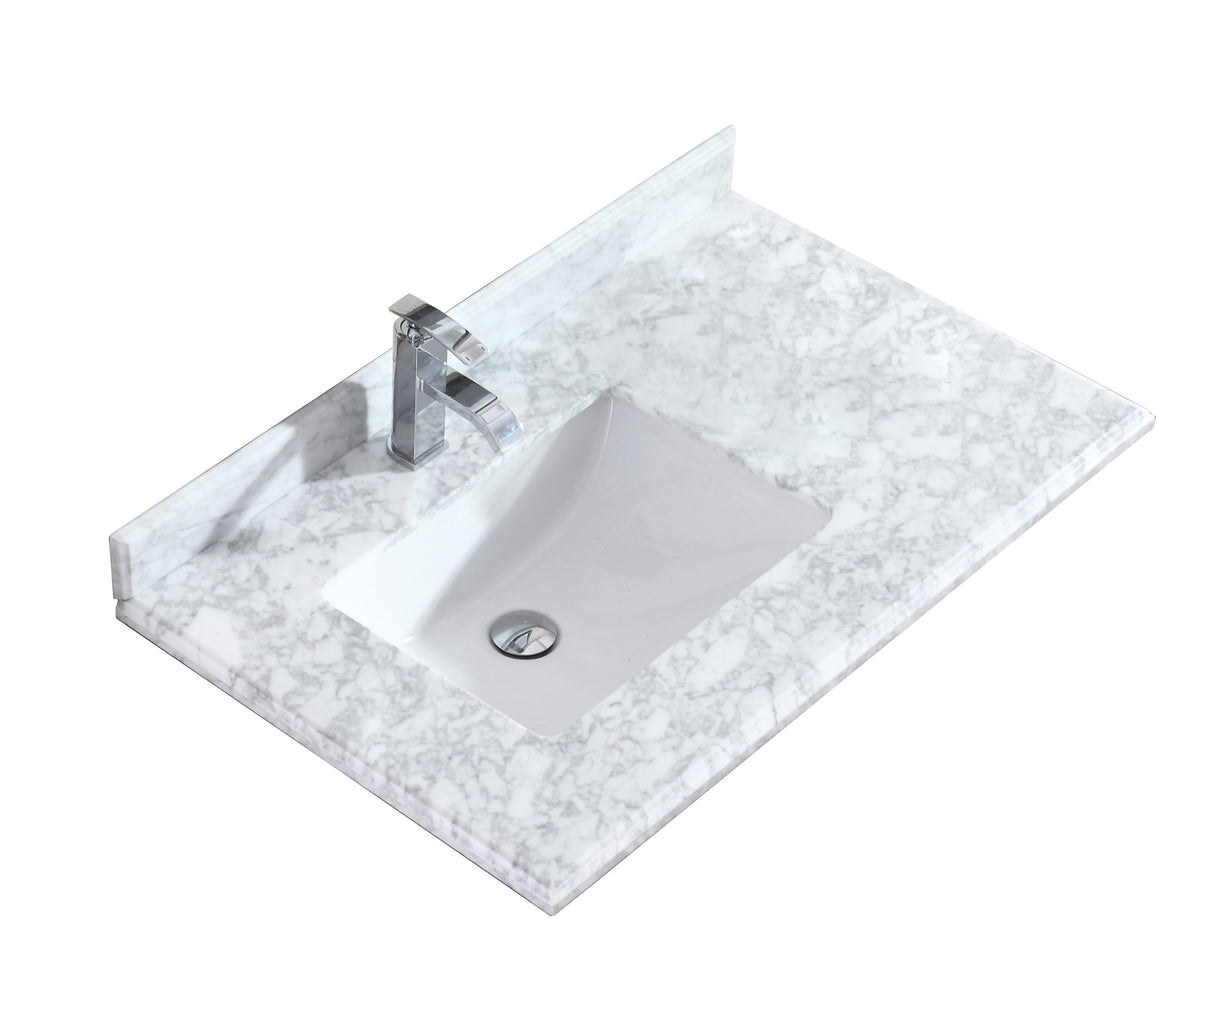 Odyssey 36" Single Hole White Carrara Marble Countertop with Left Offset Rectangular Ceramic Sink Laviva 313613-36-WC